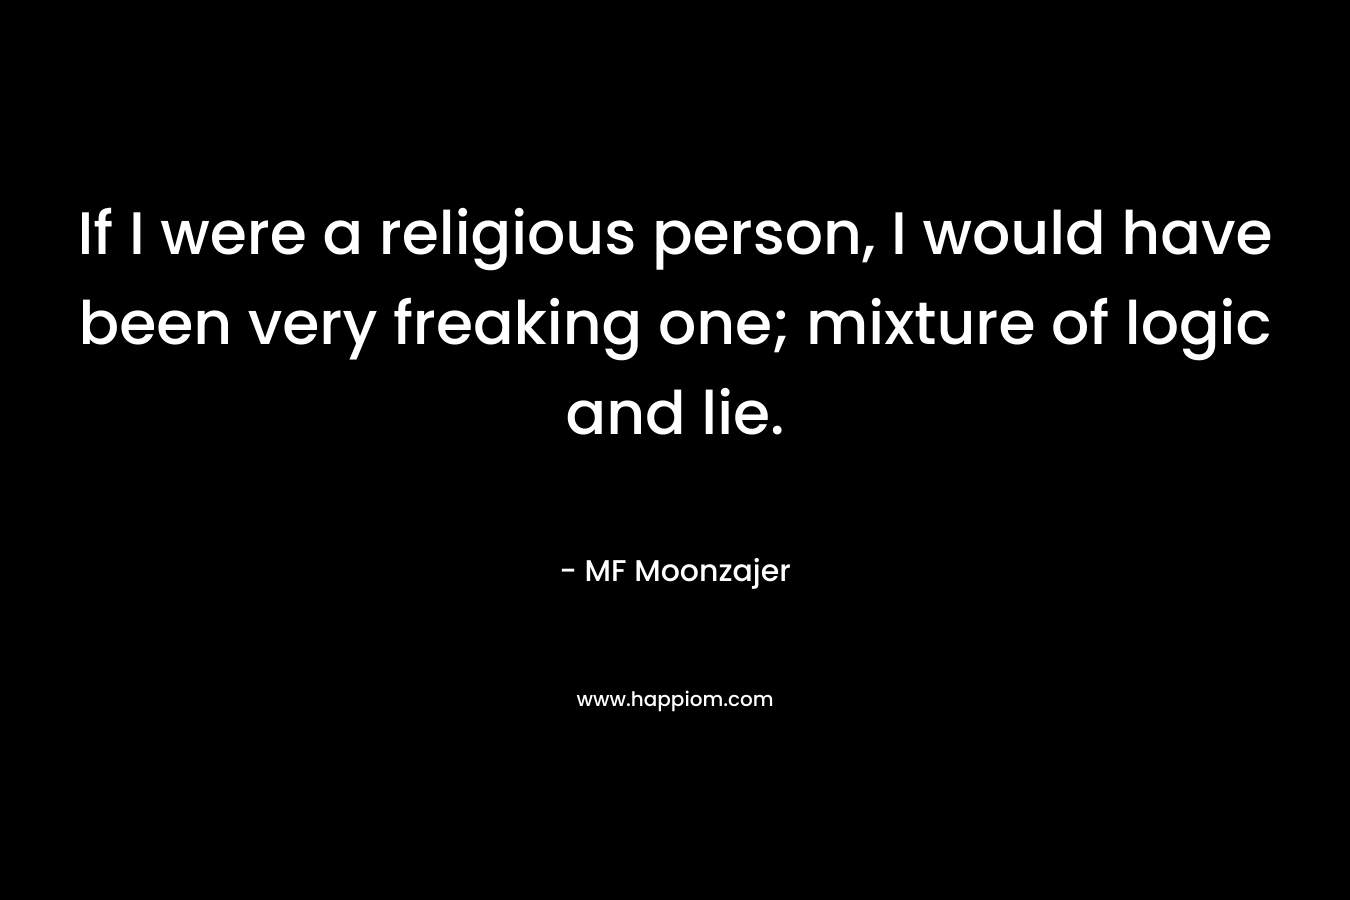 If I were a religious person, I would have been very freaking one; mixture of logic and lie. – MF Moonzajer